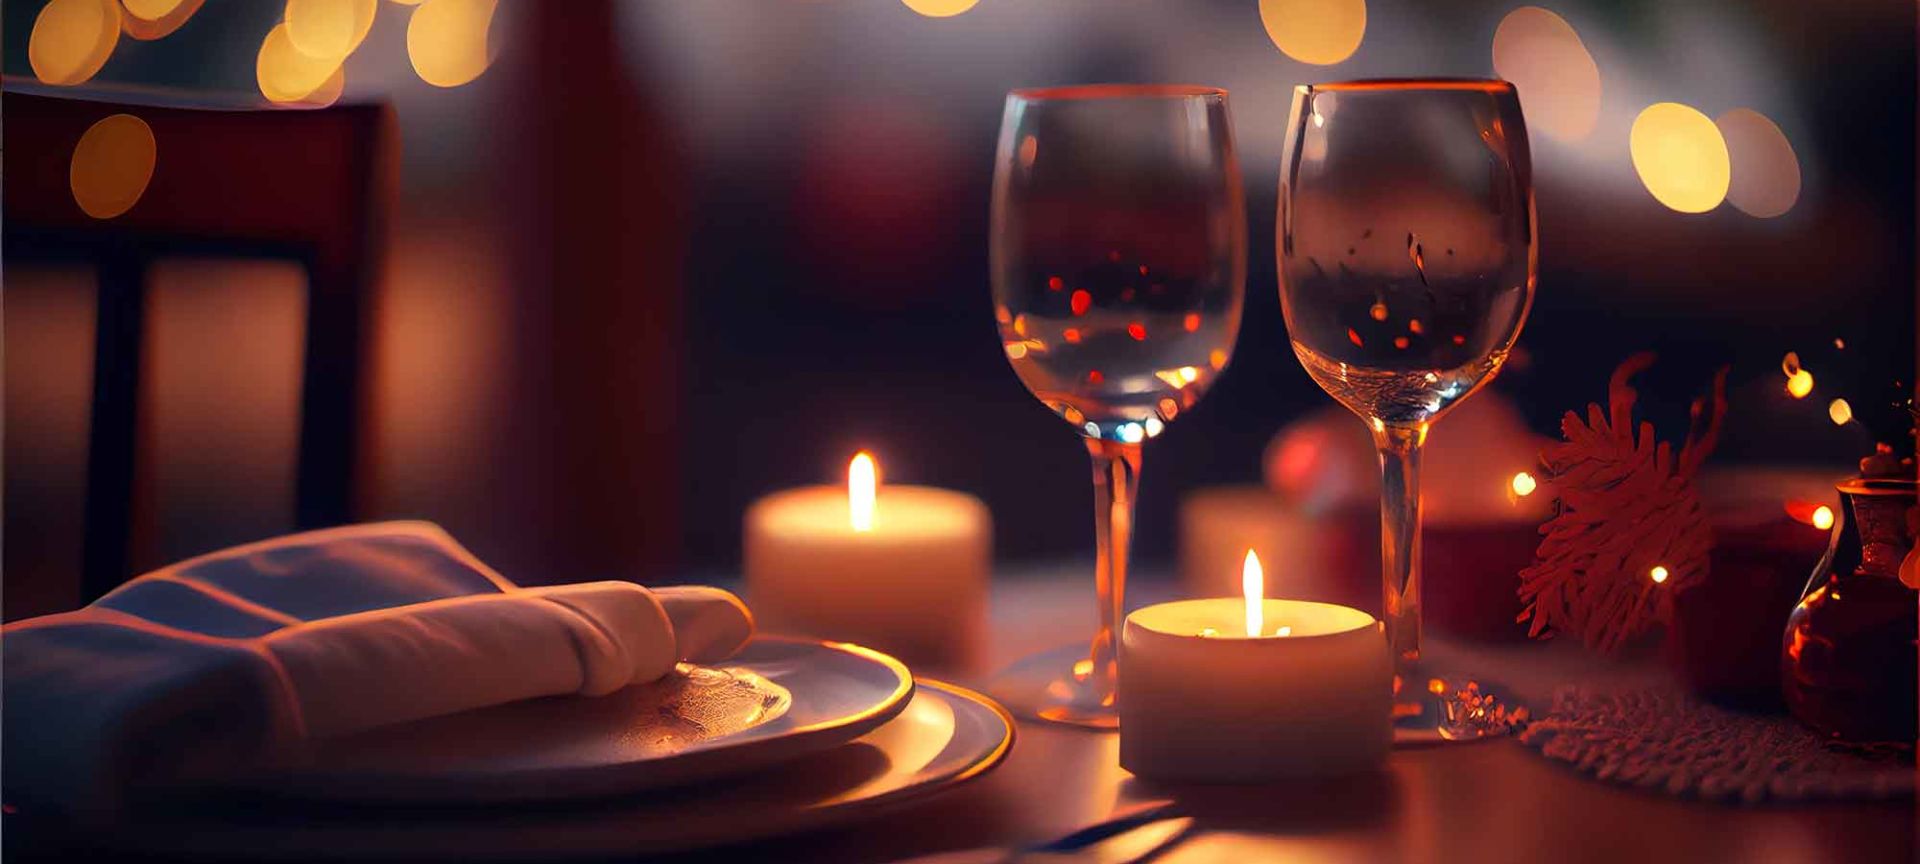 A Table With Wine Glasses And A Candle On It